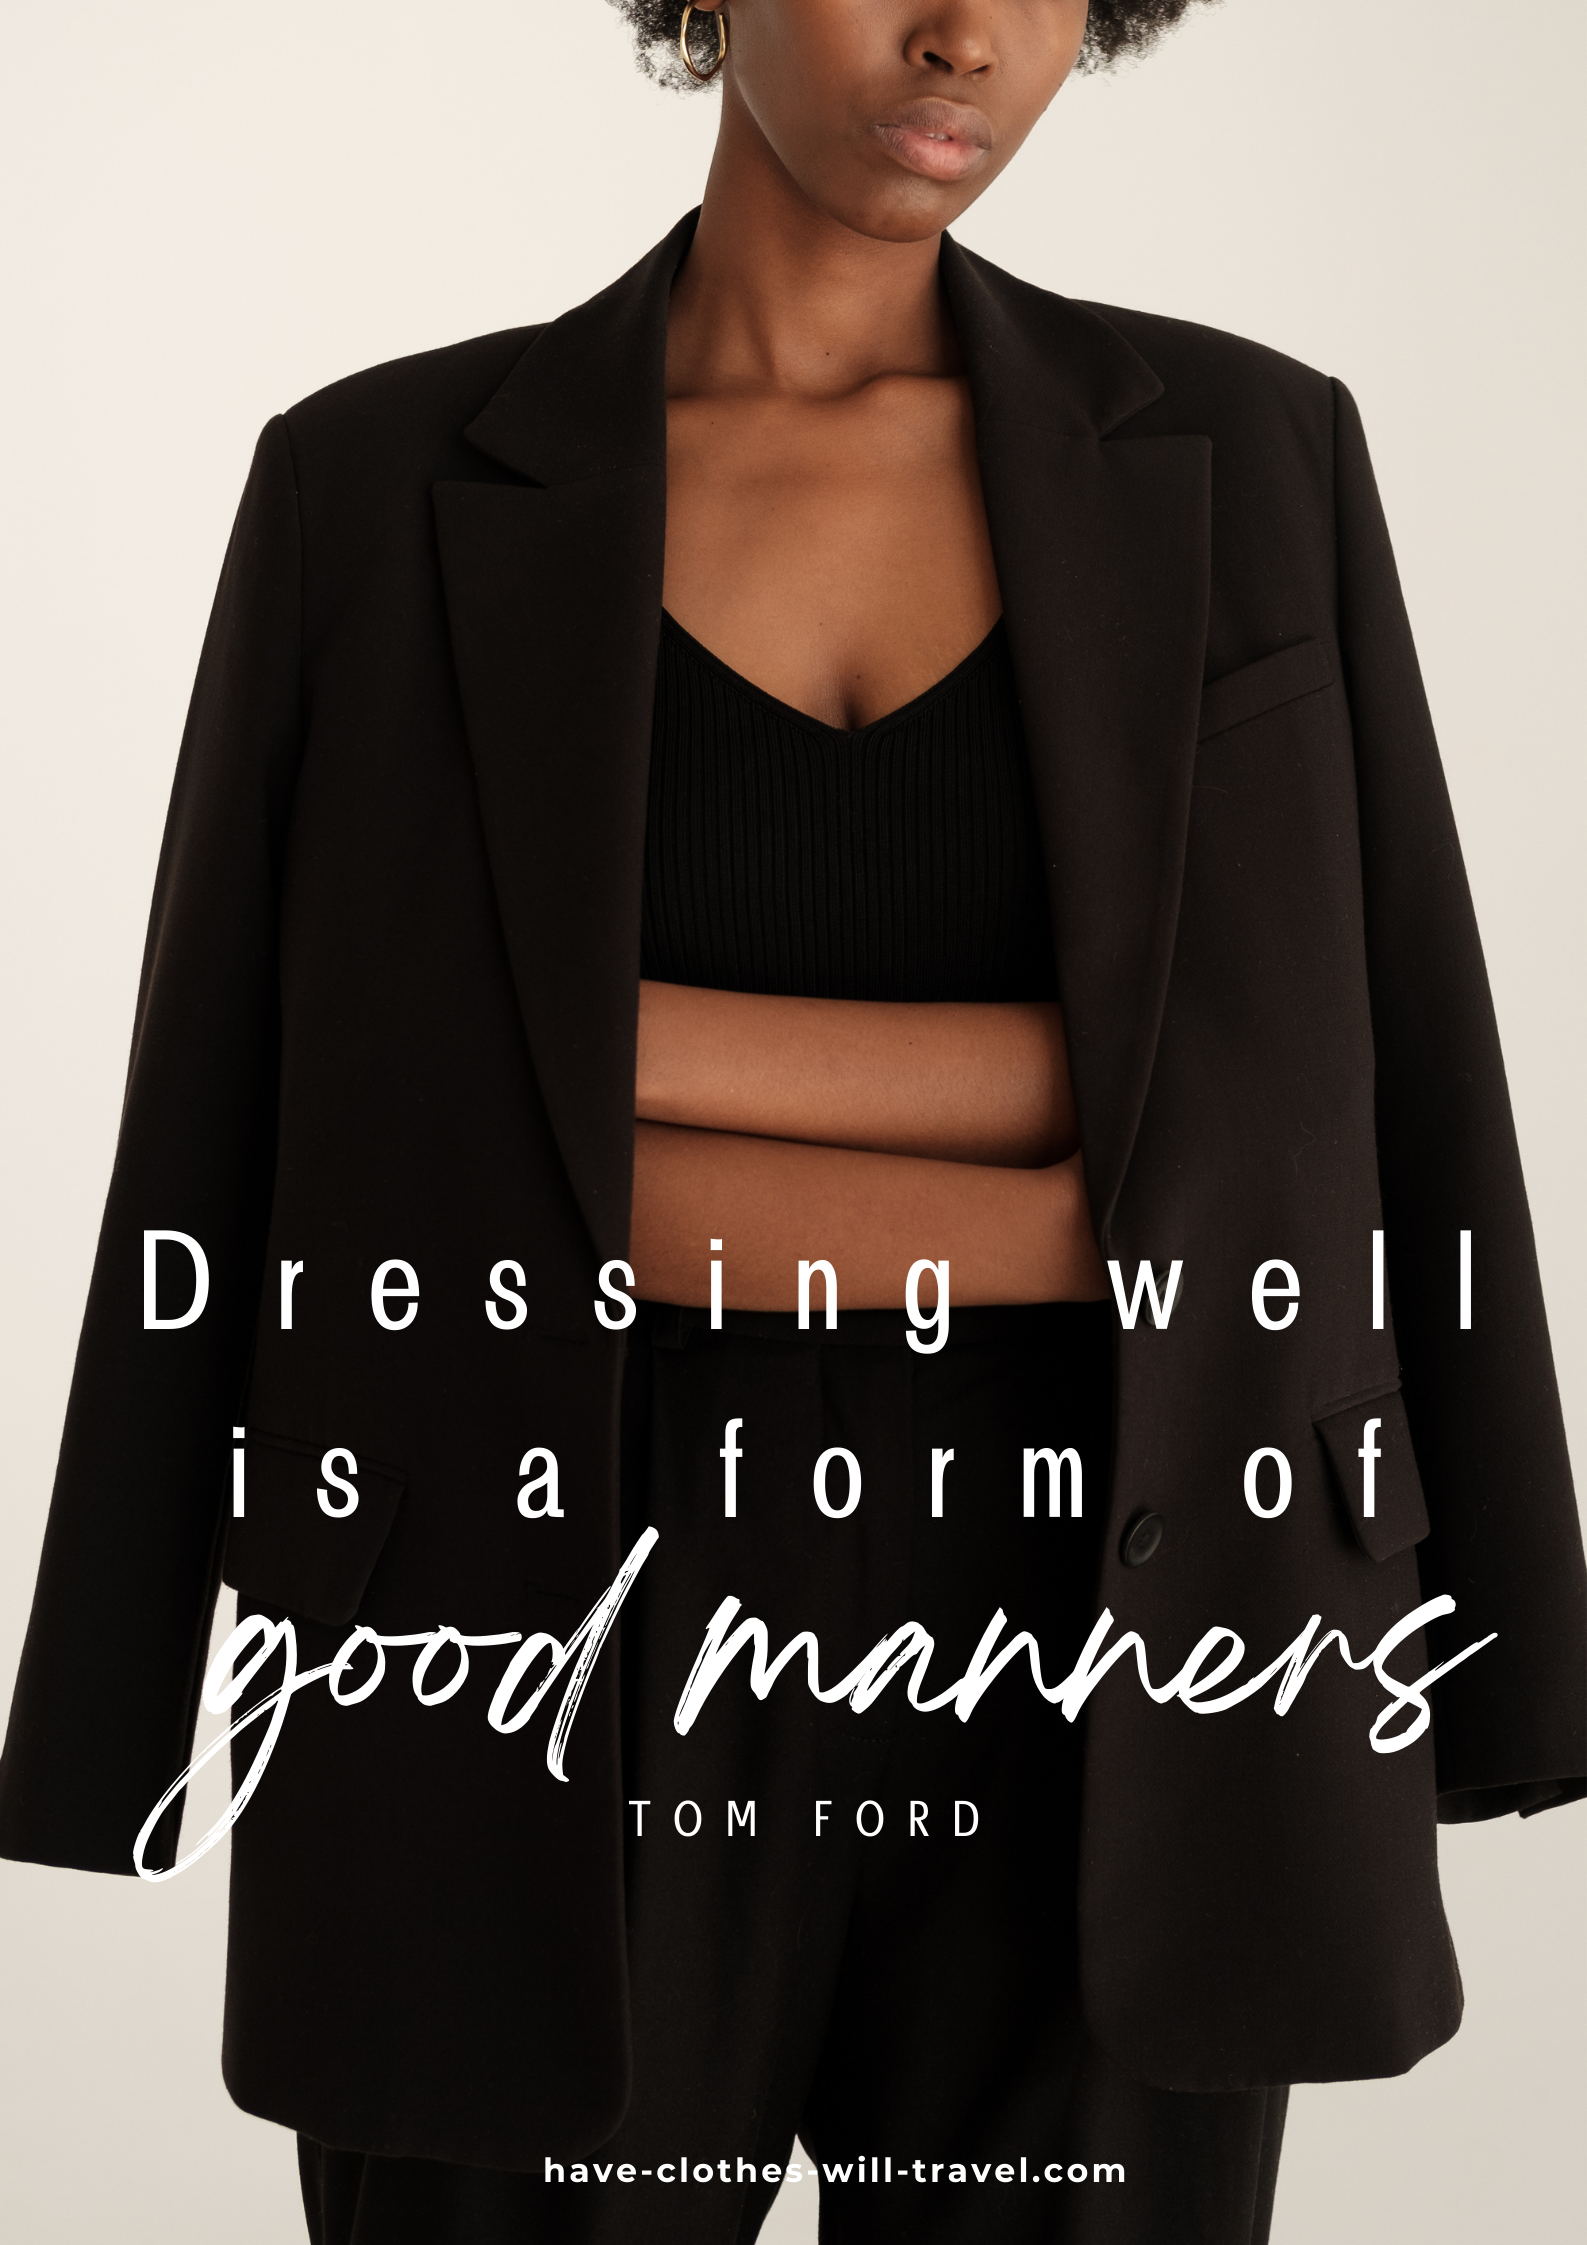 An image of a model wearing an all-black outfit with an oversized blazer jacket draped over her shoulder. White text across the image says, "Dressing well is a form of good manners. – Tom Ford"